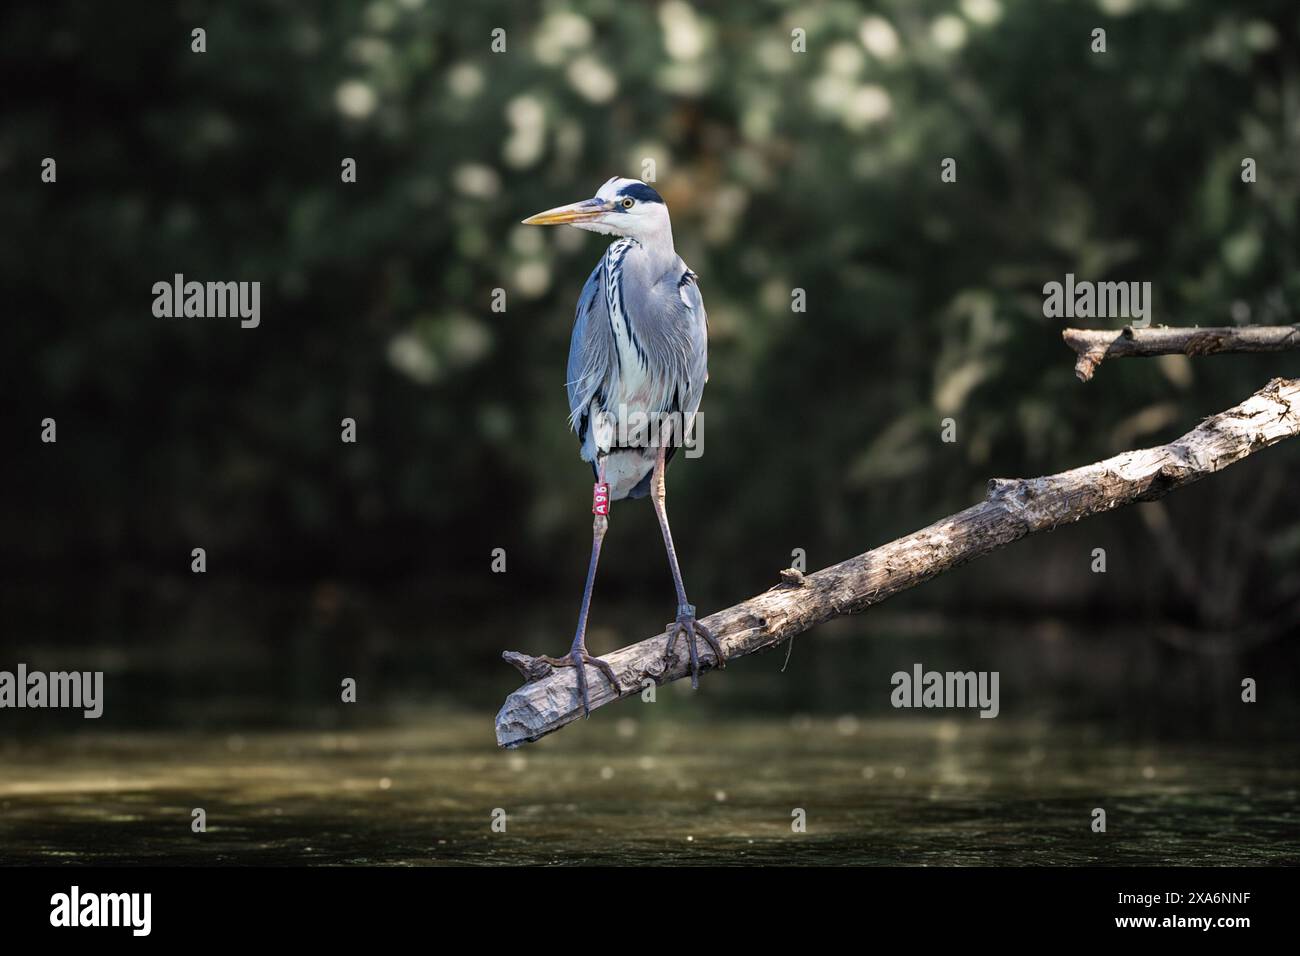 A grey heron resting on a tree branch over water Stock Photo